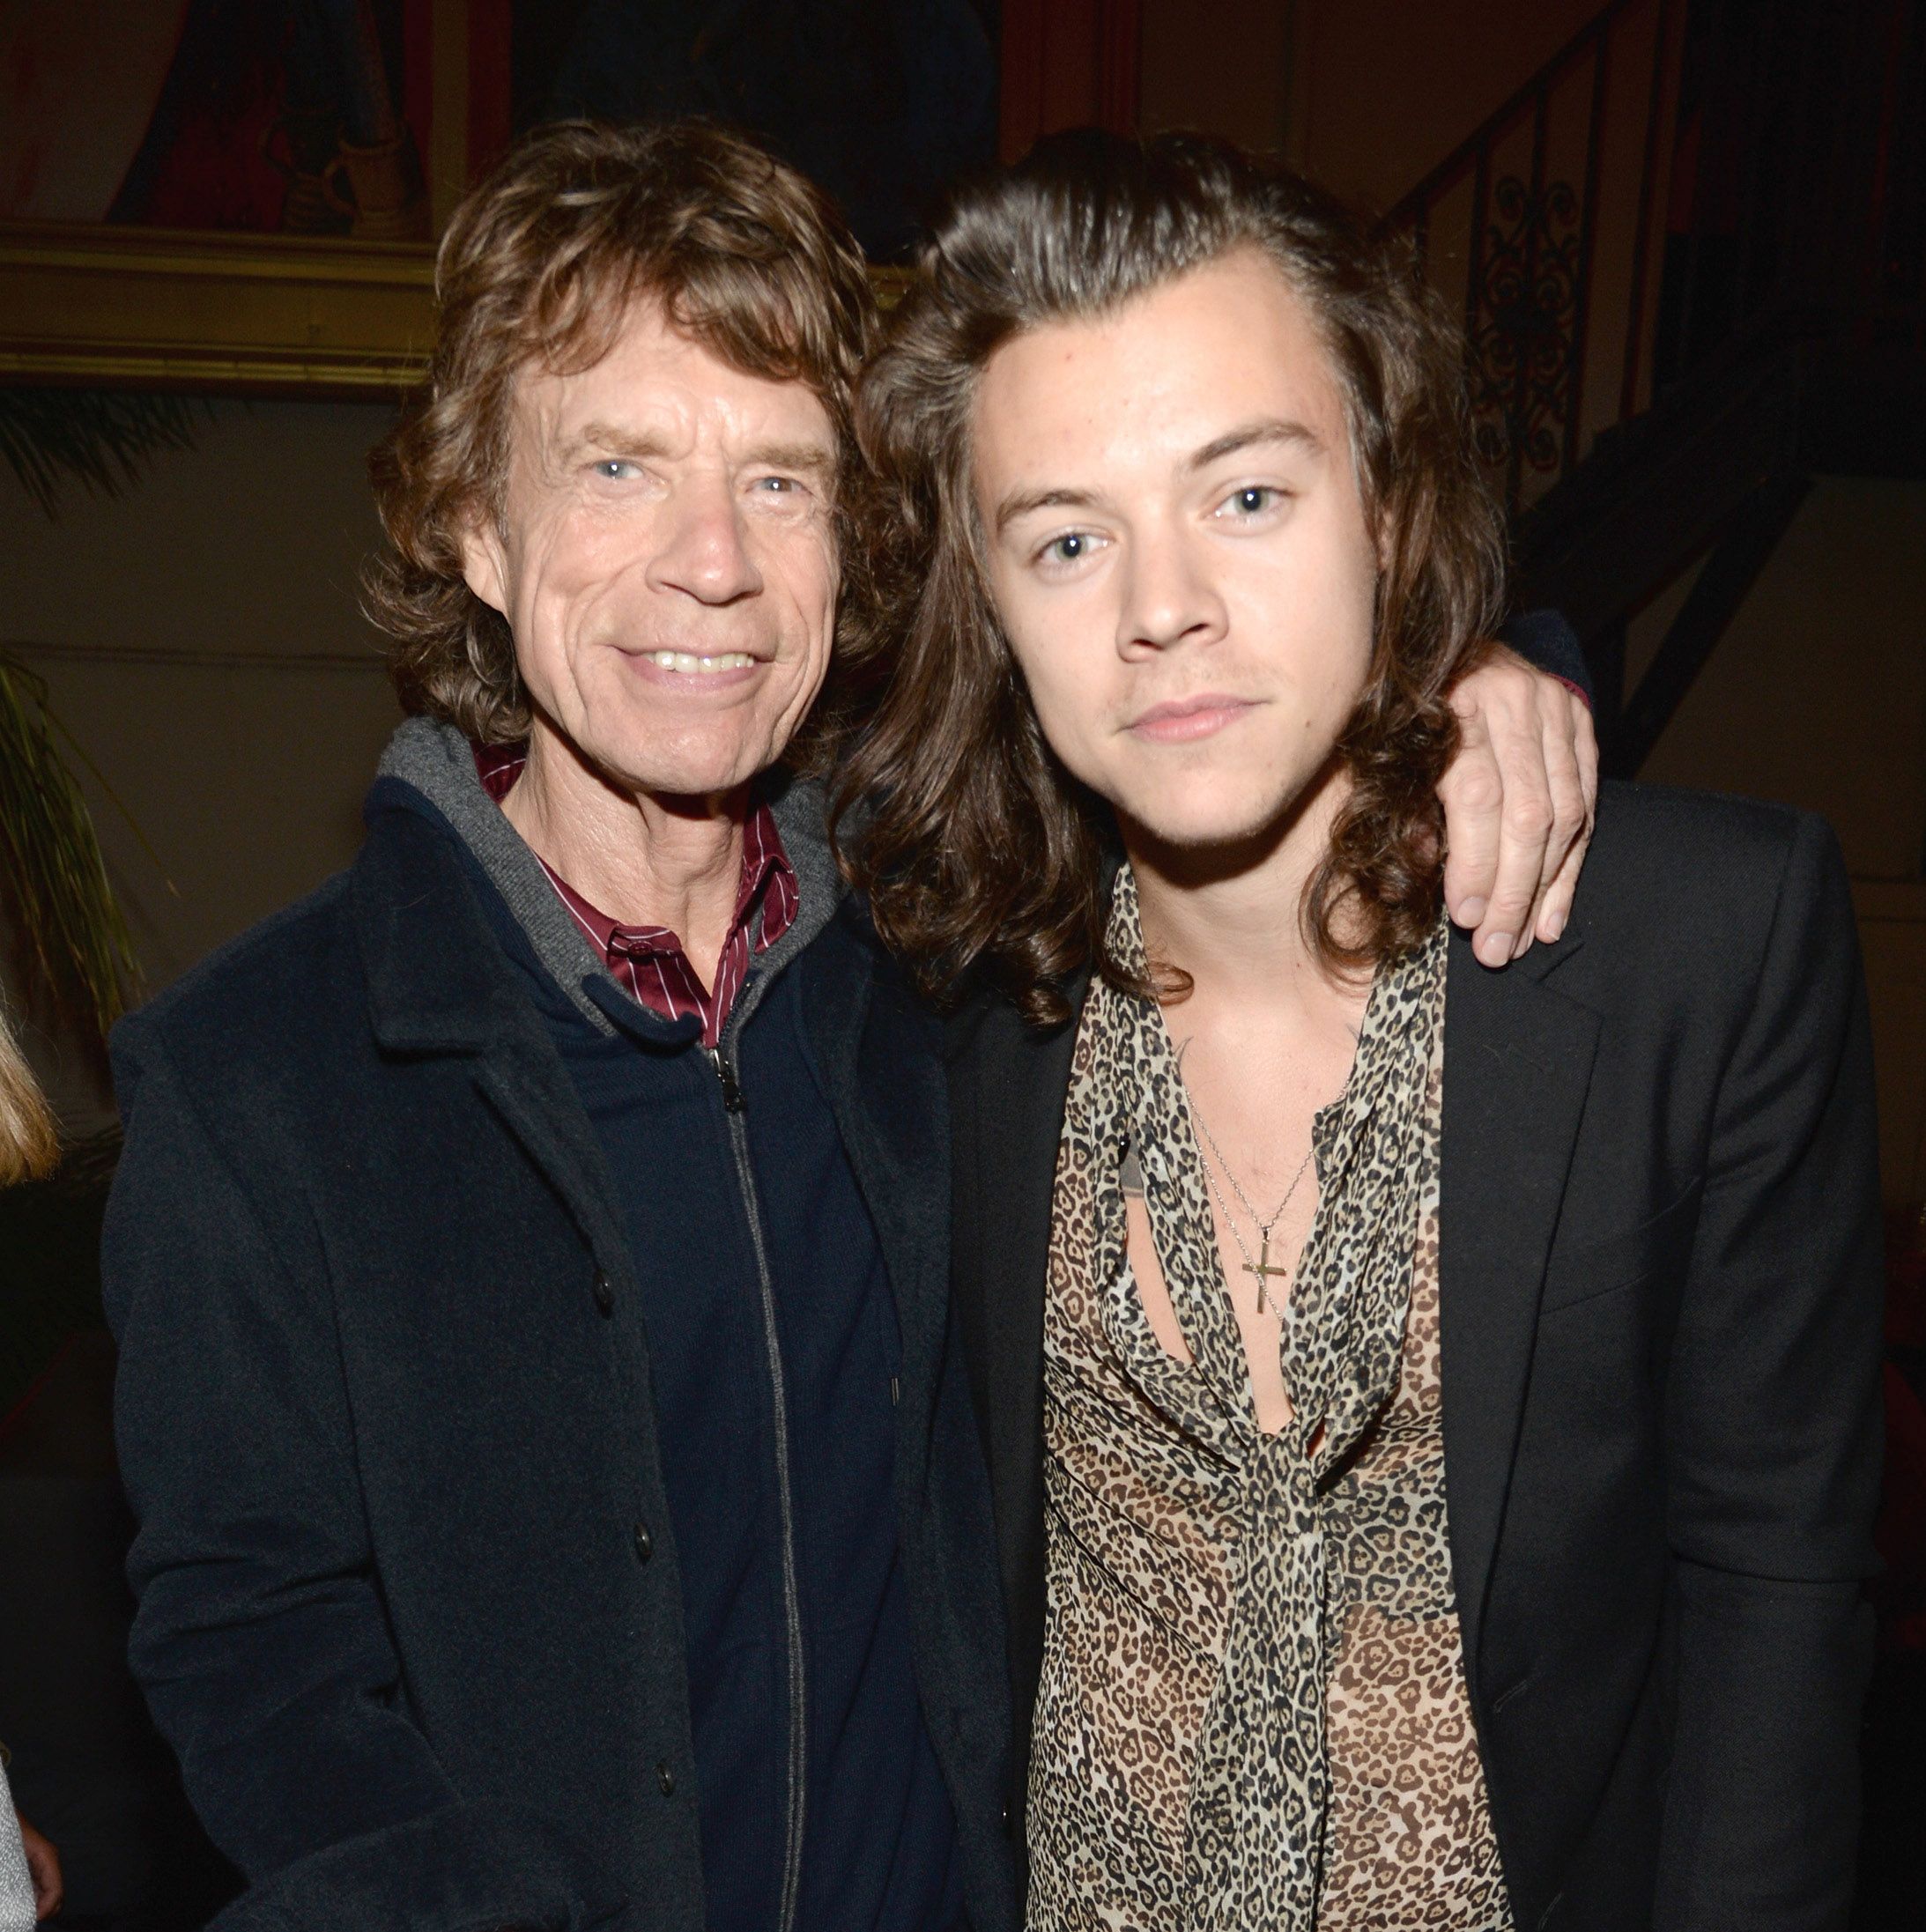 Mick Jagger Says Harry Styles 